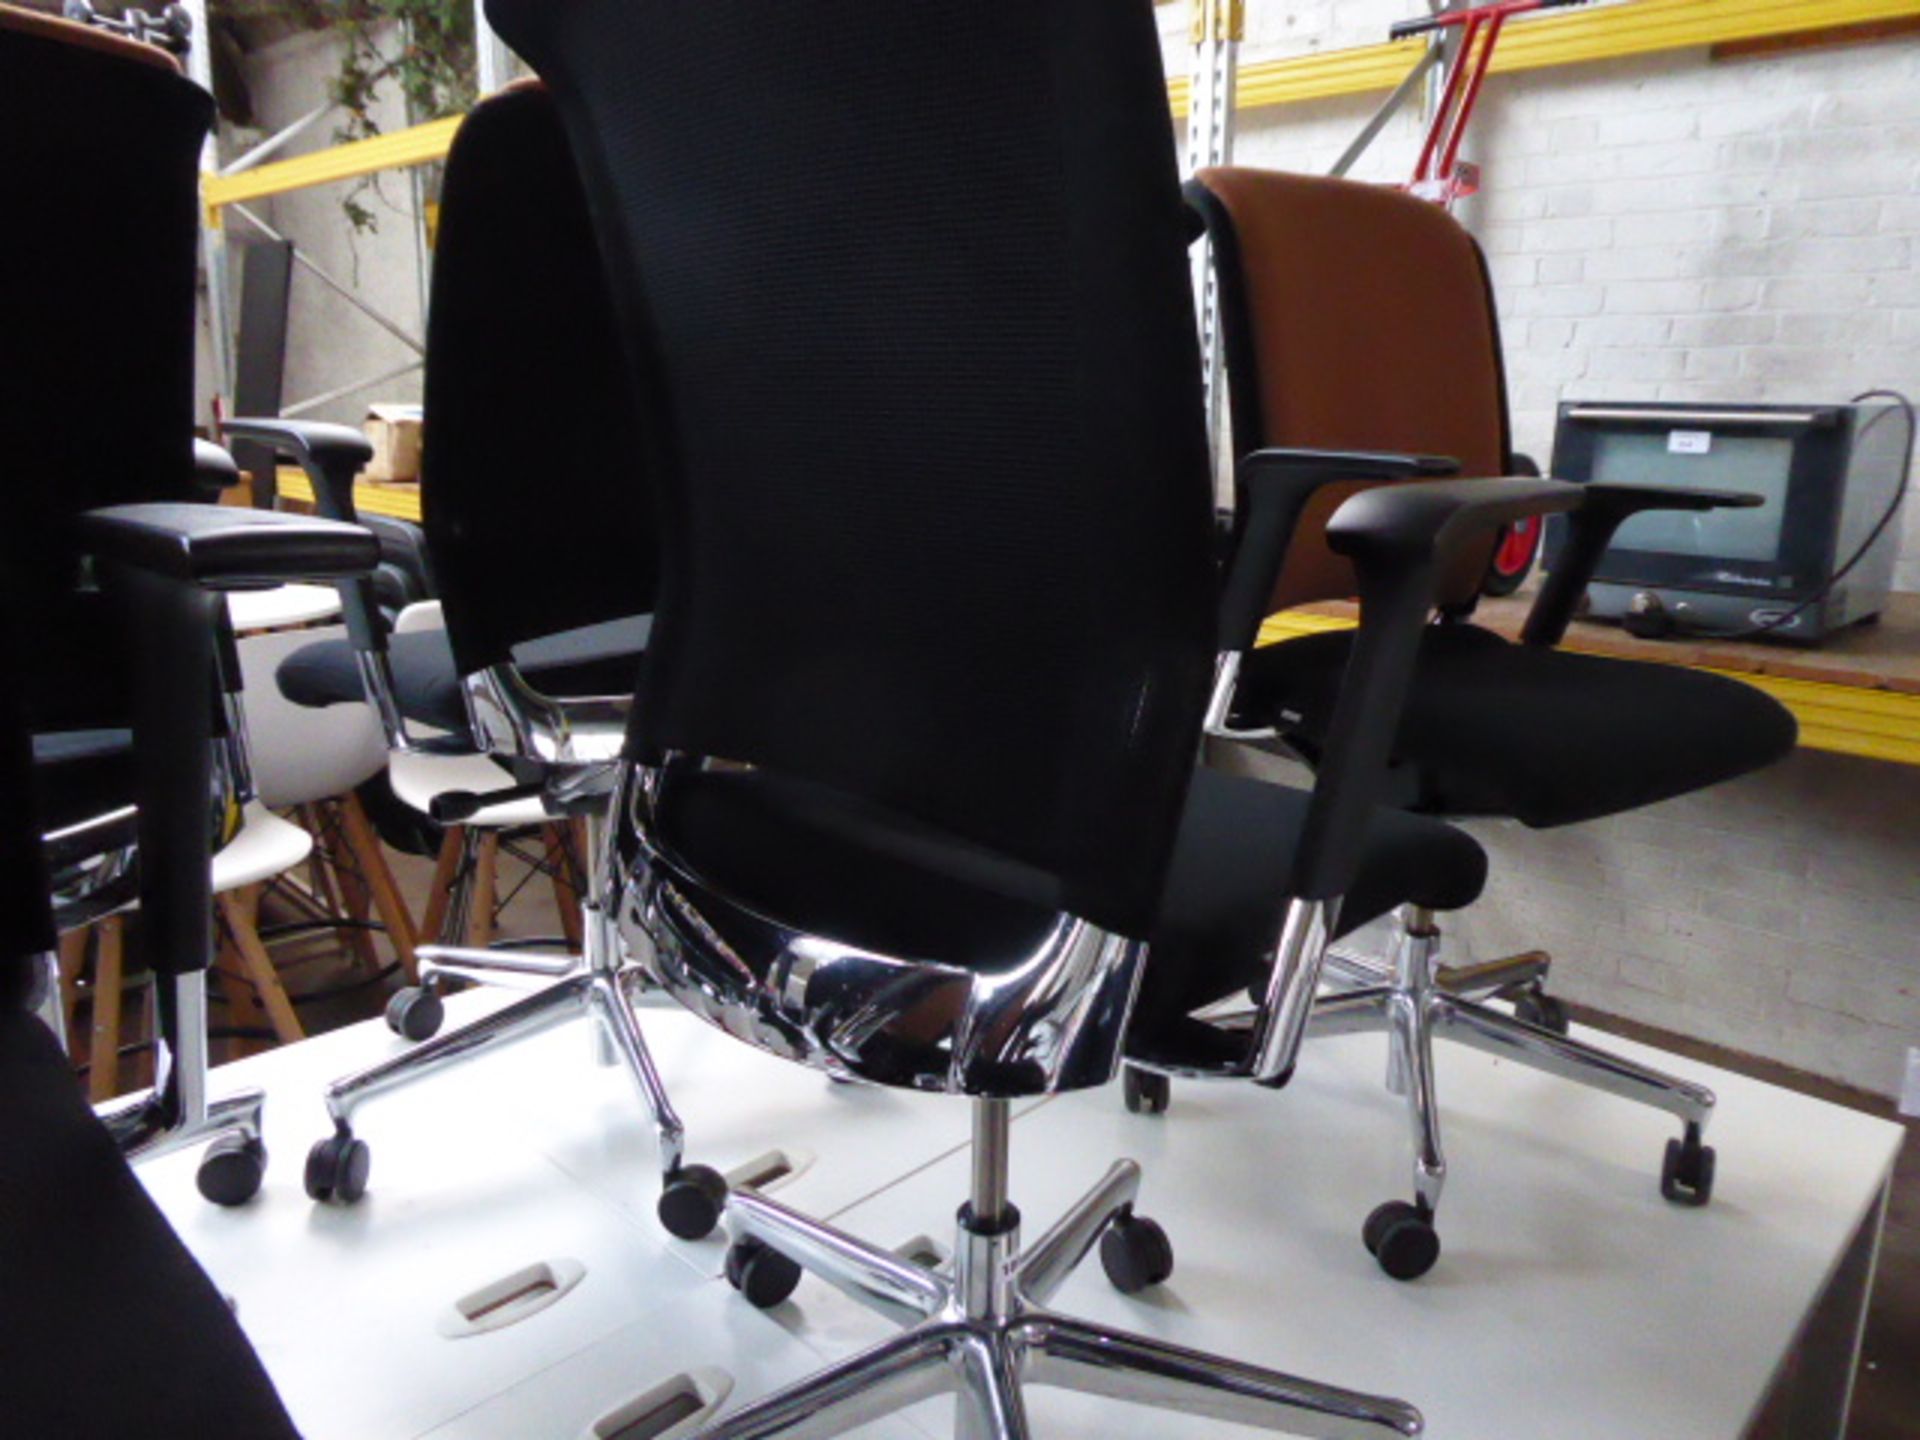 Interstuhl black cloth seat and black and brown cloth back rest chrome frame office swivel armchair - Image 2 of 2